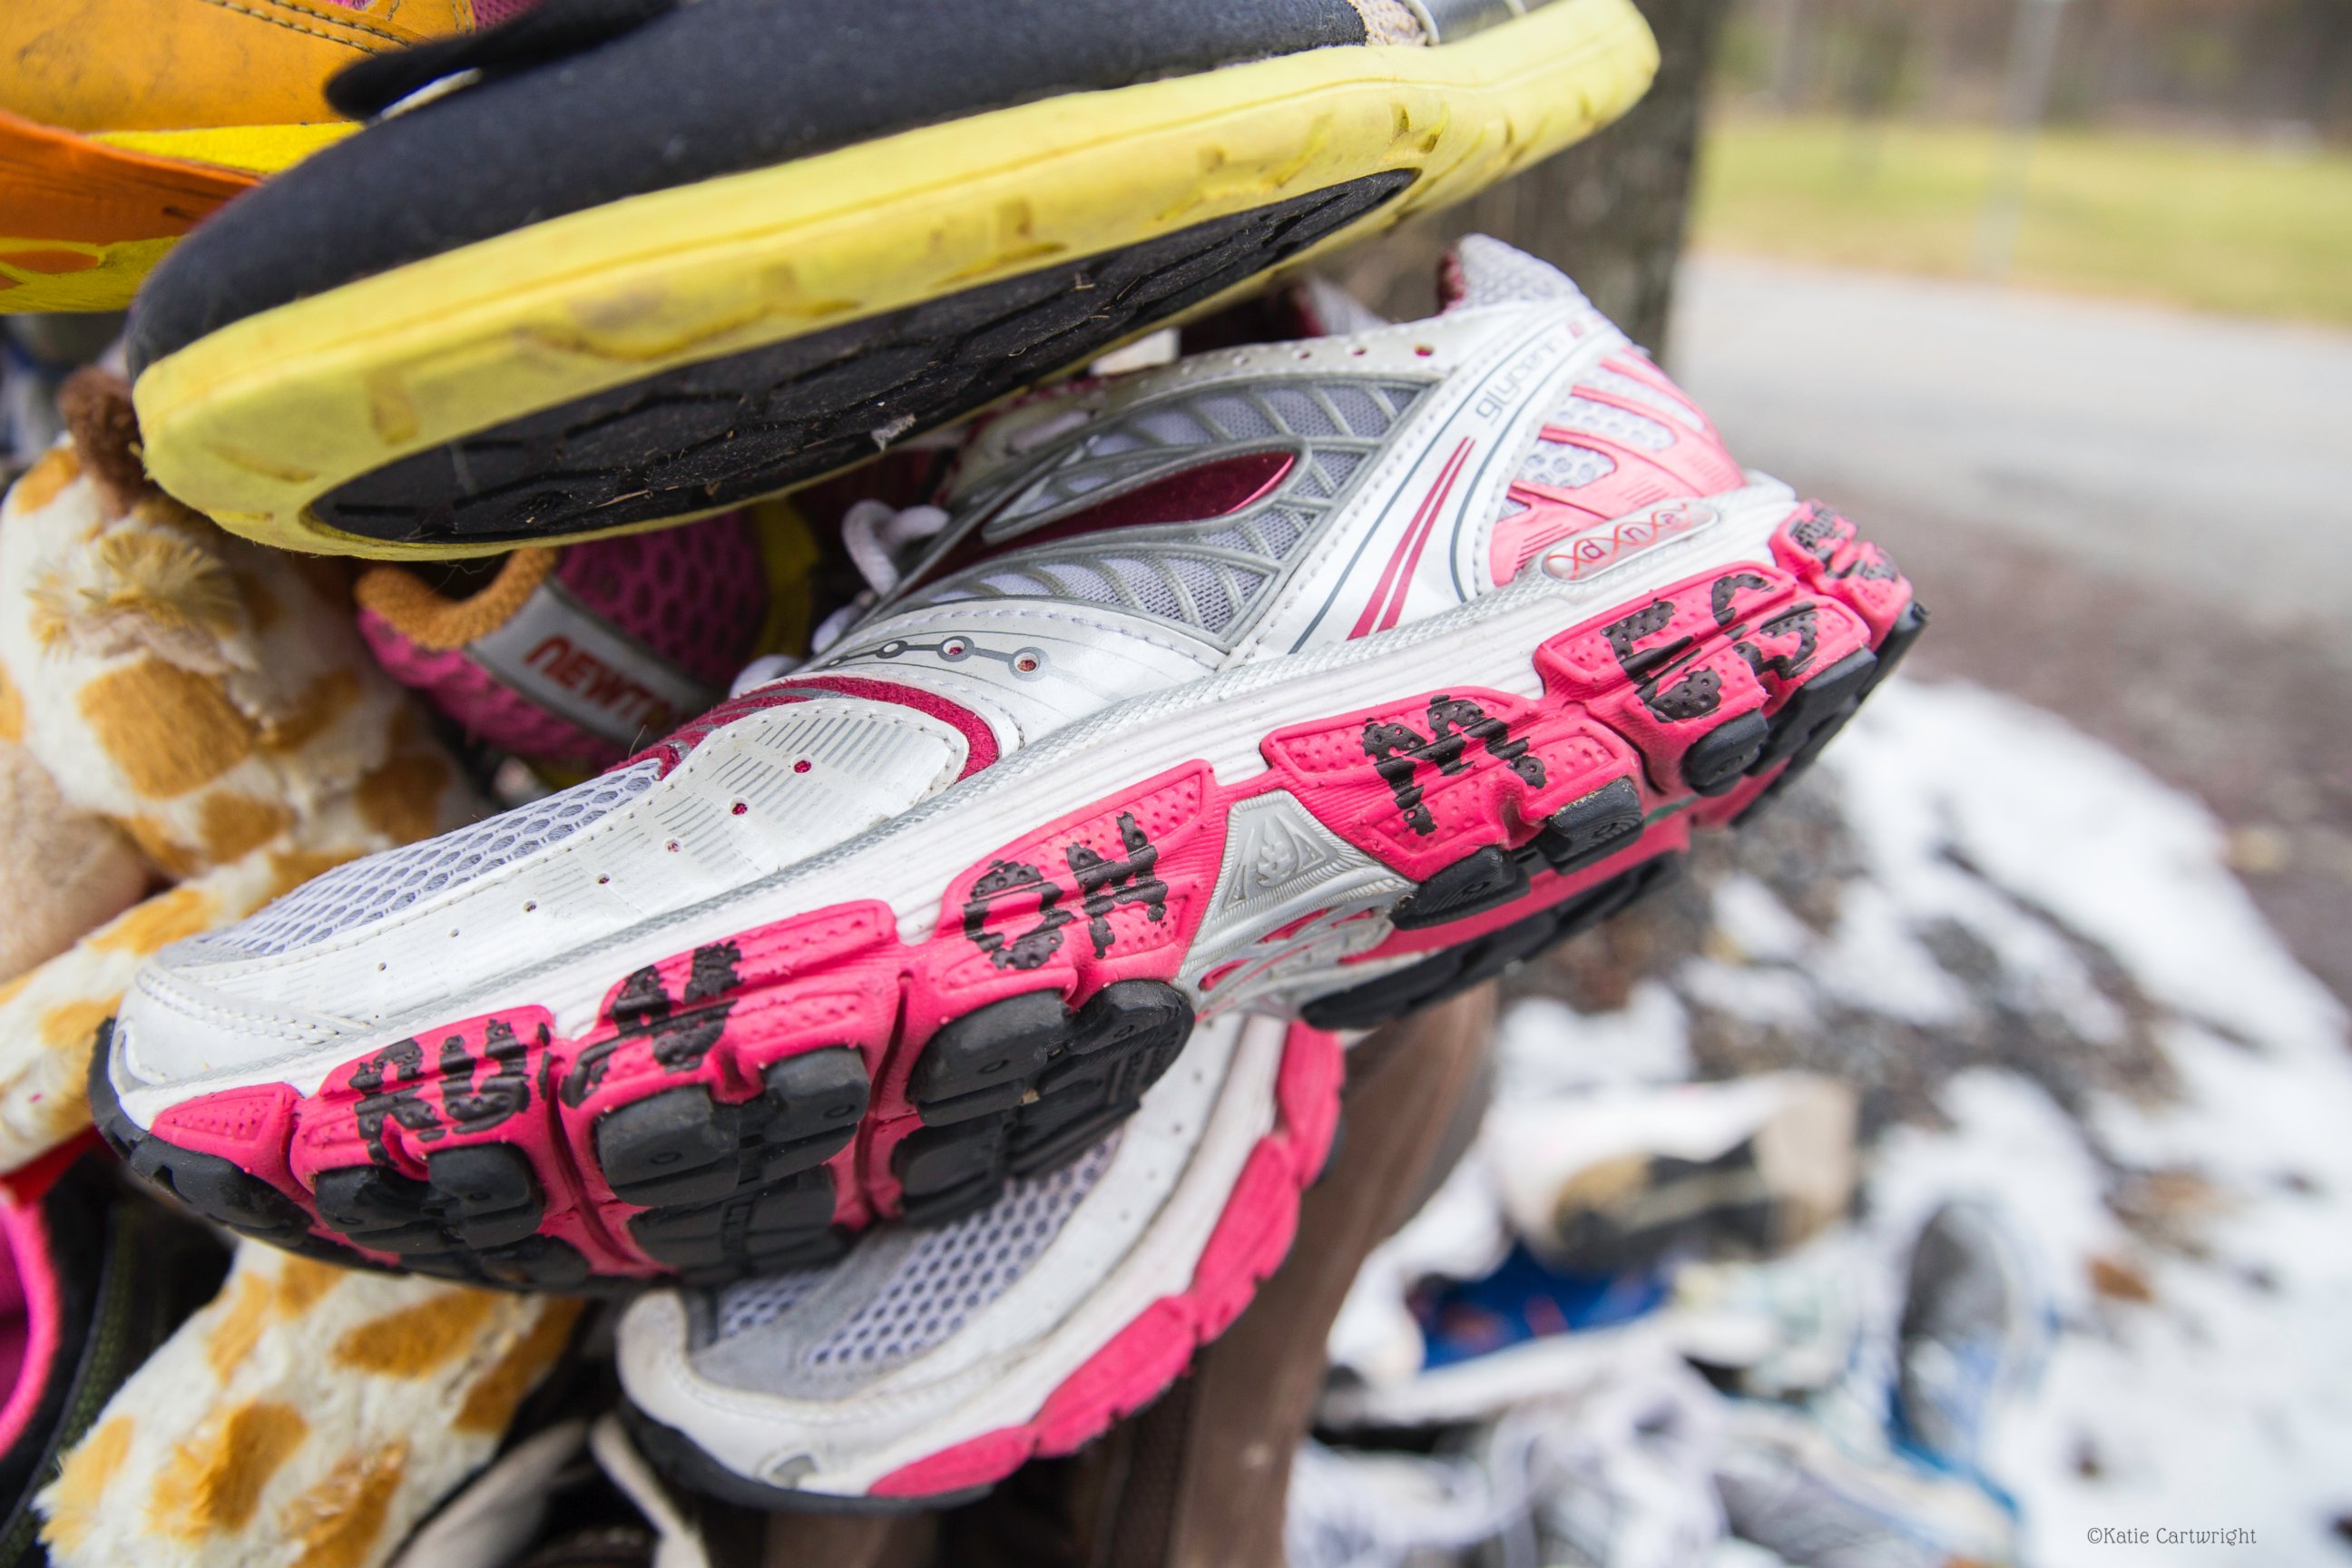 PHOTO: Some shoes contained messages for Meg Cross Menzies. They will all be refurbished and donated